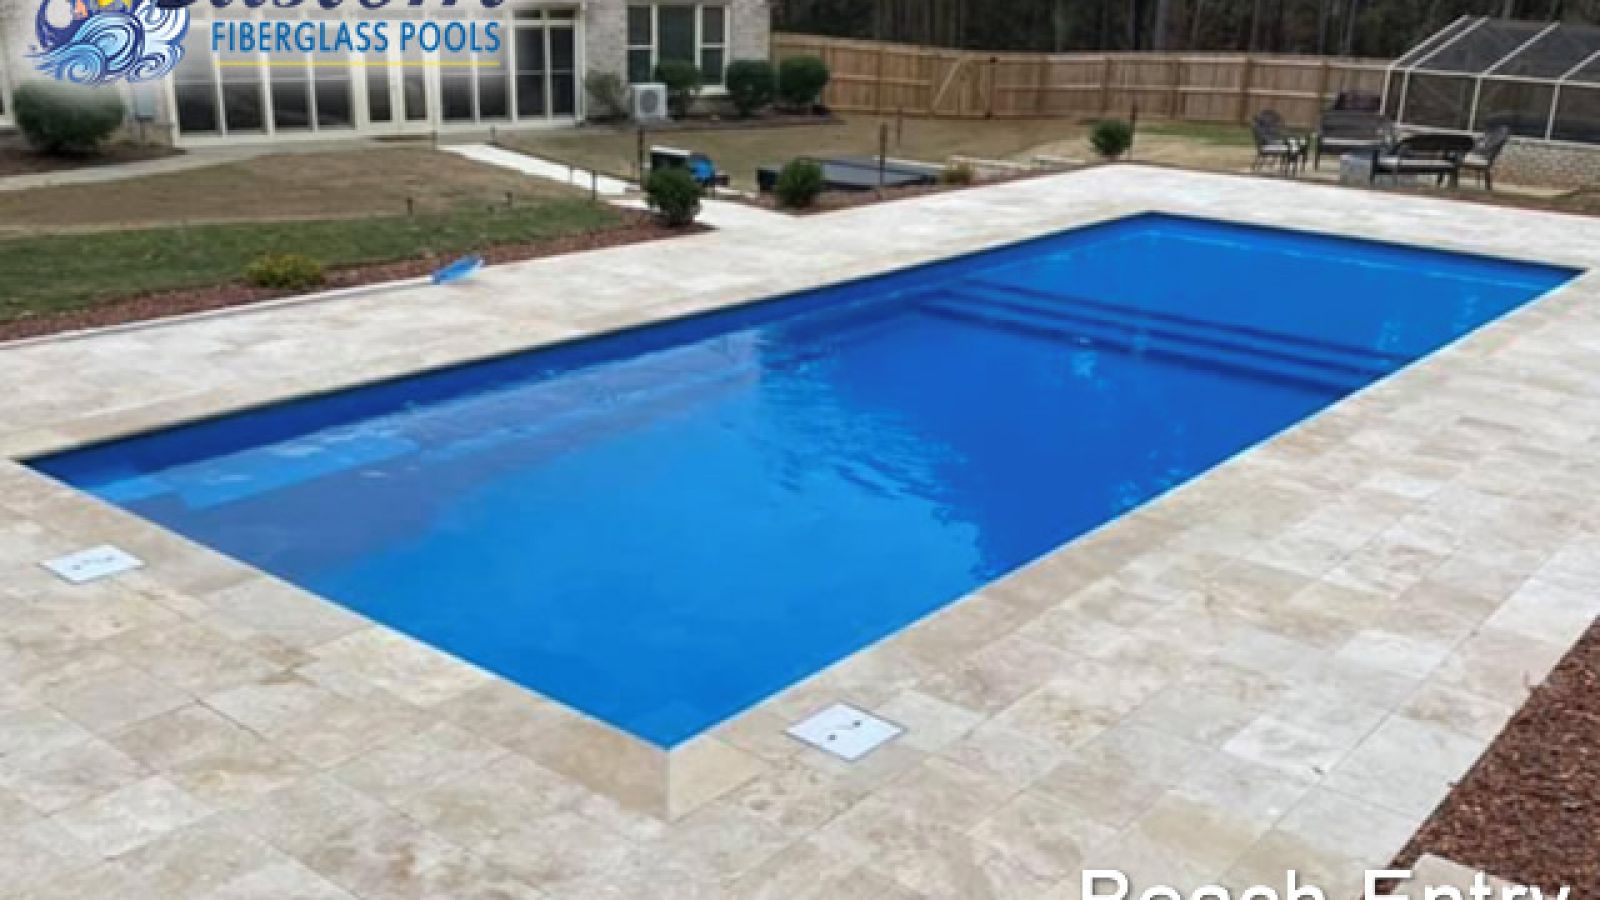 14' x 36' Beach Entry Fiberglass Pool offering a personal beach experience in Clarksville, TN